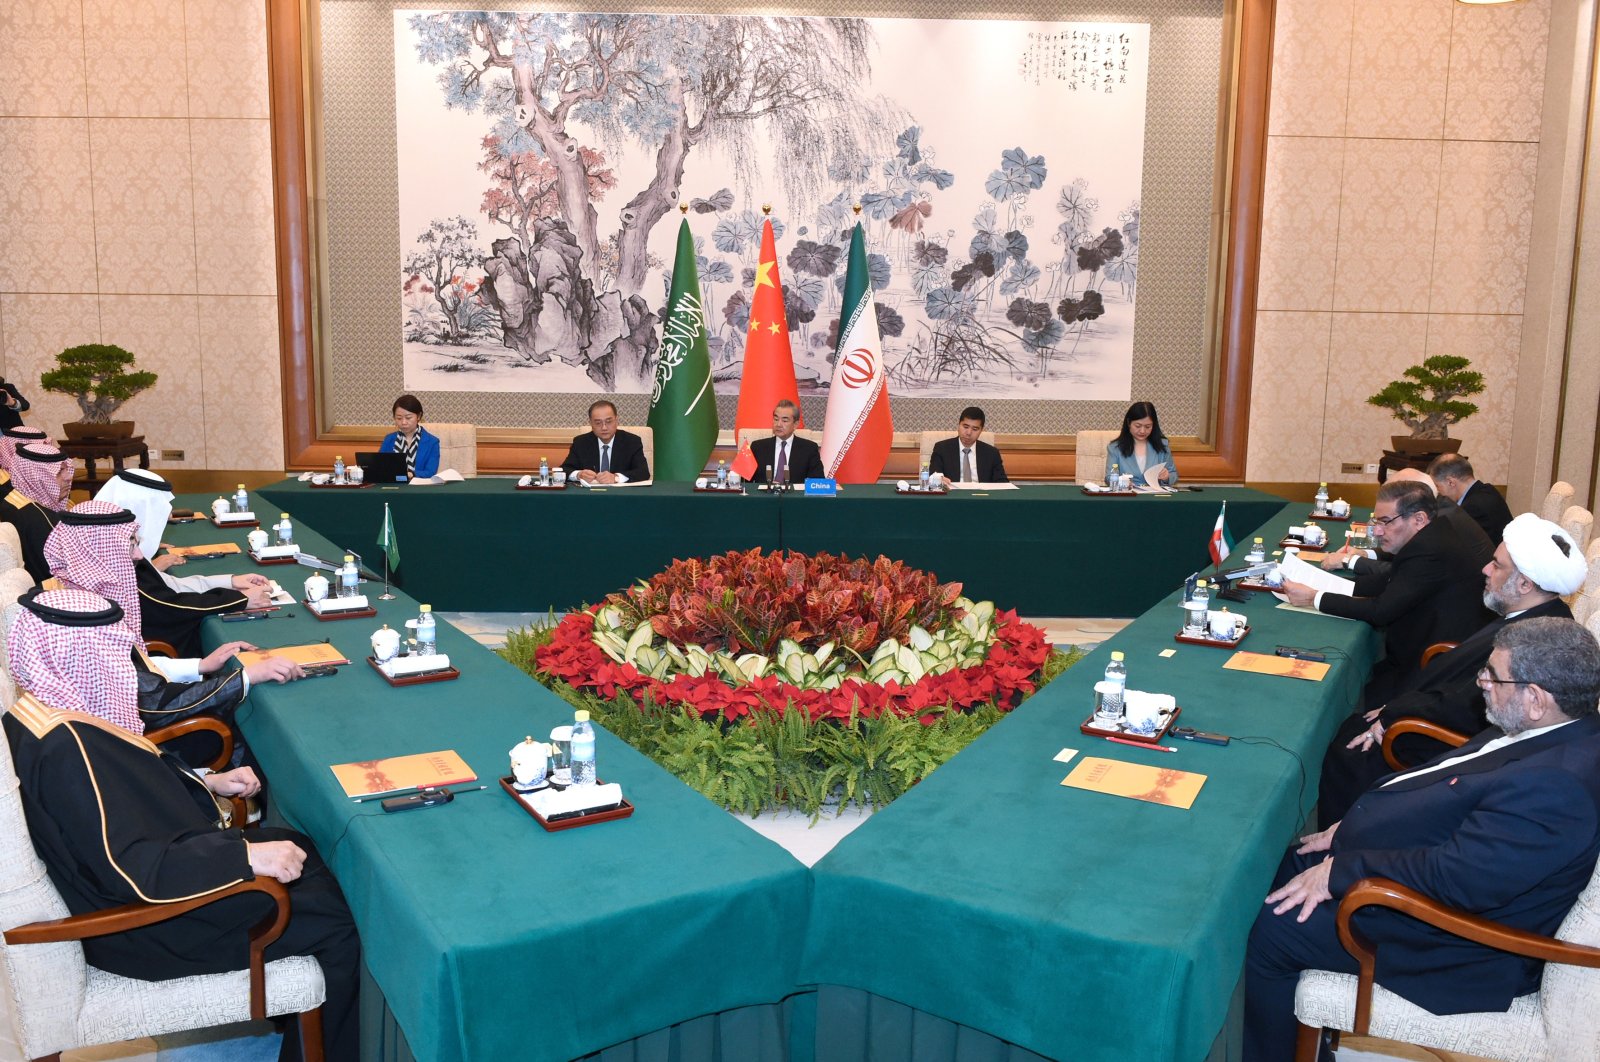 Wang Yi, a member of the Political Bureau of the Communist Party of China (CPC) Central Committee and director of the Office of the Foreign Affairs Commission of the CPC Central Committee, presides over the closing meeting of the talks between a Saudi delegation and an Iranian delegation in Beijing, China, March 10, 2023. (AP Photo)